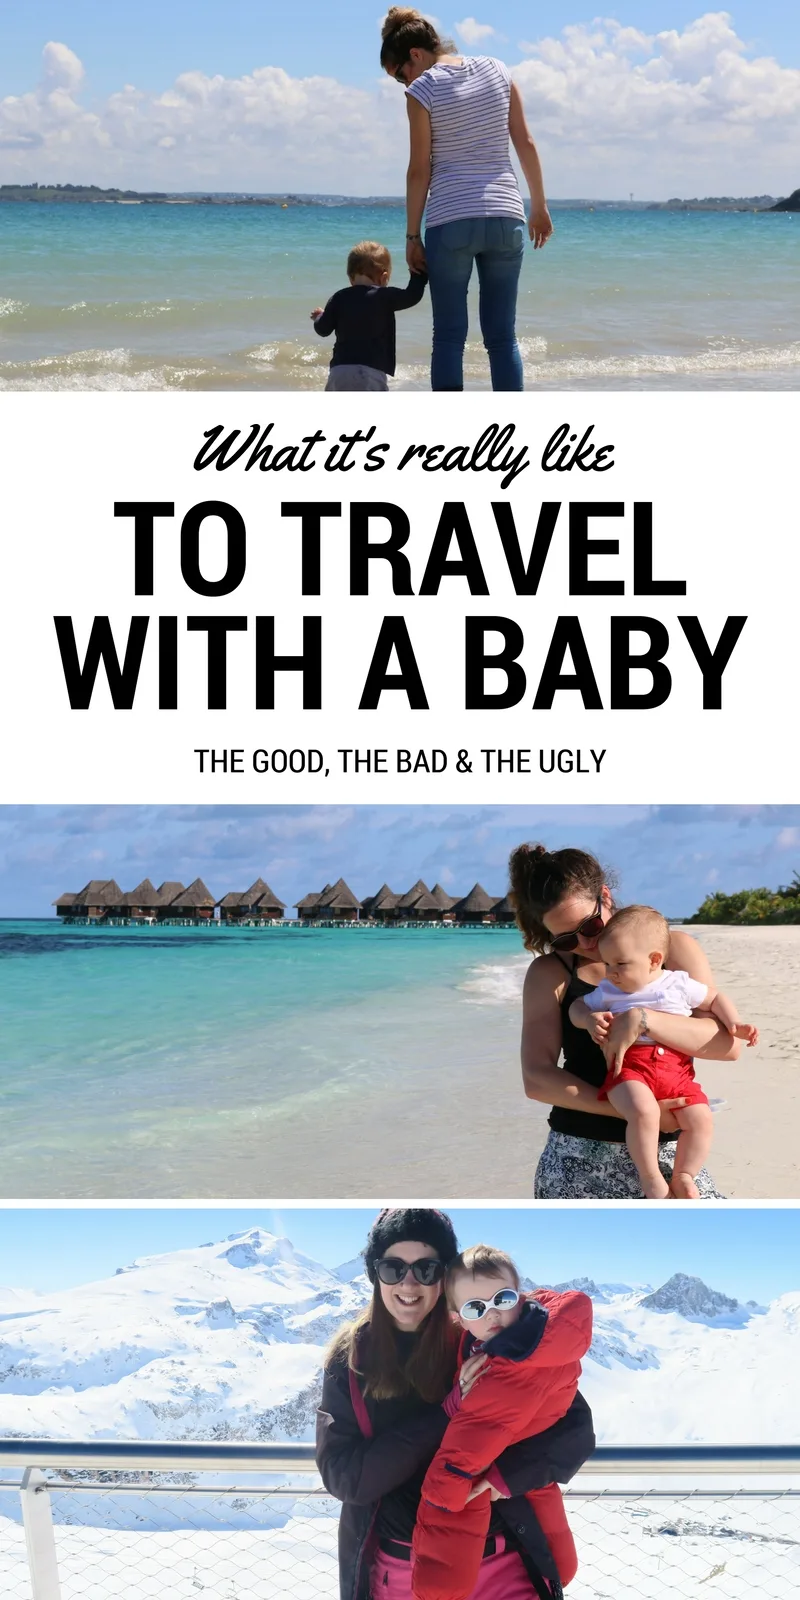 What it's really like to travel with a baby- The good, the bad and the ugly